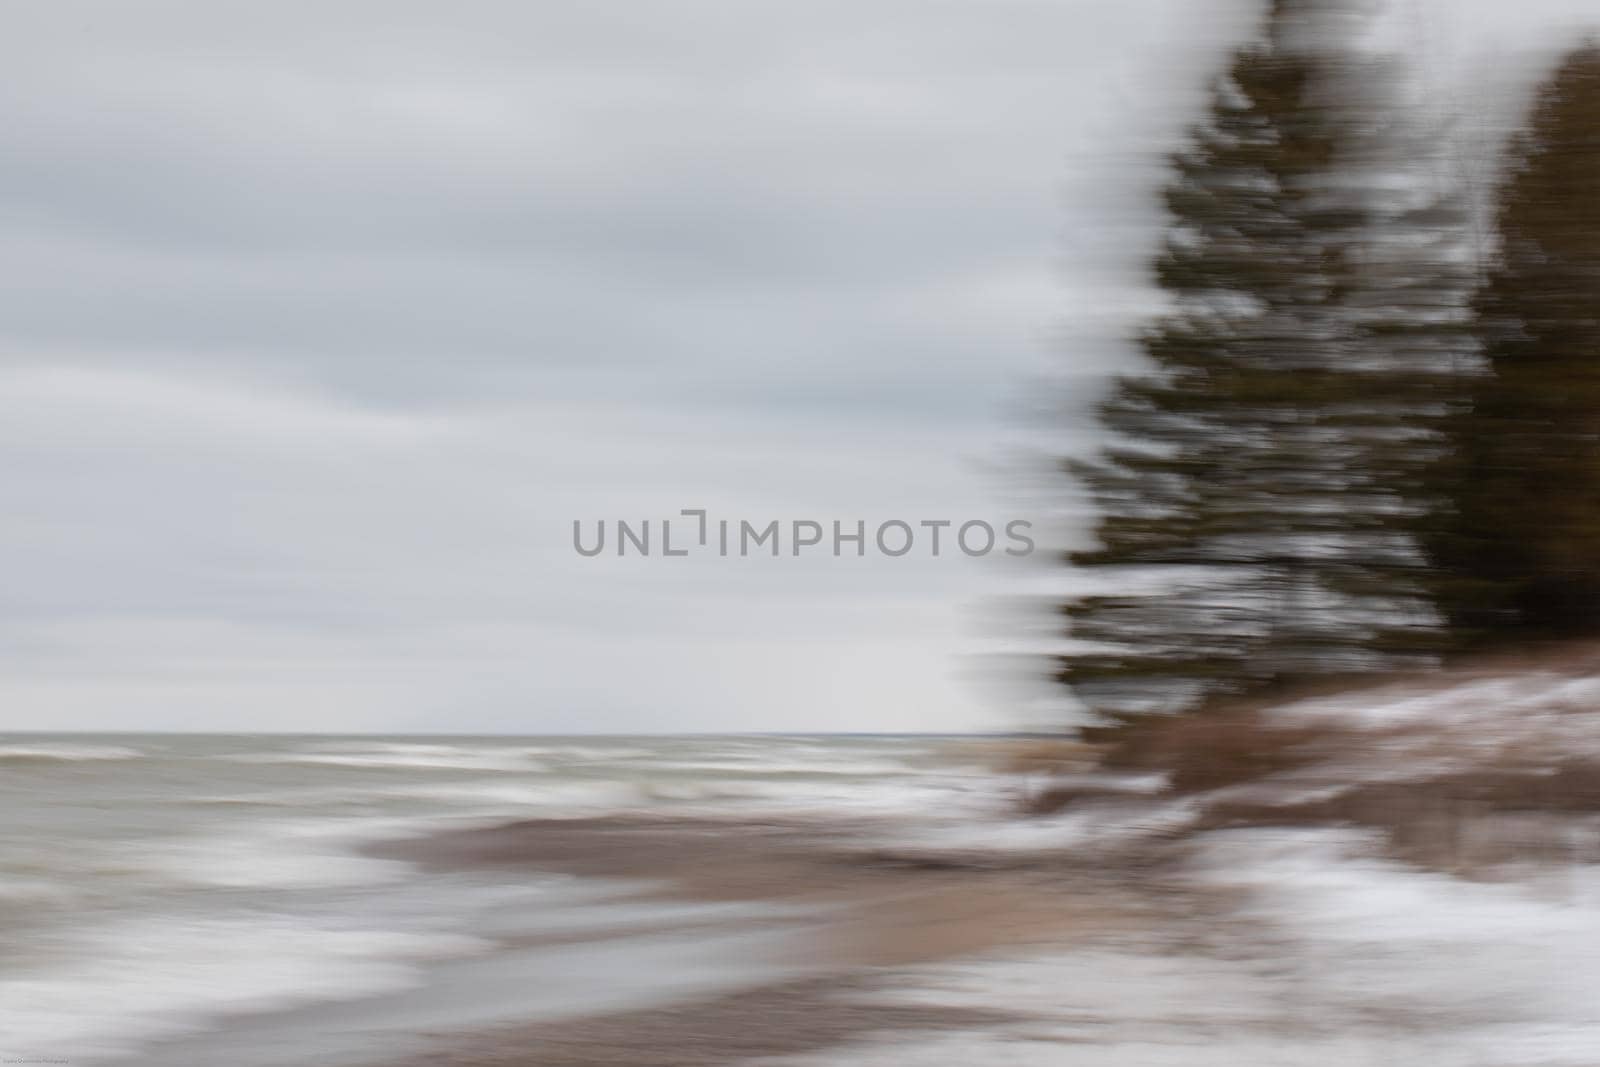 Abstract photo of trees on a beach by Granchinho